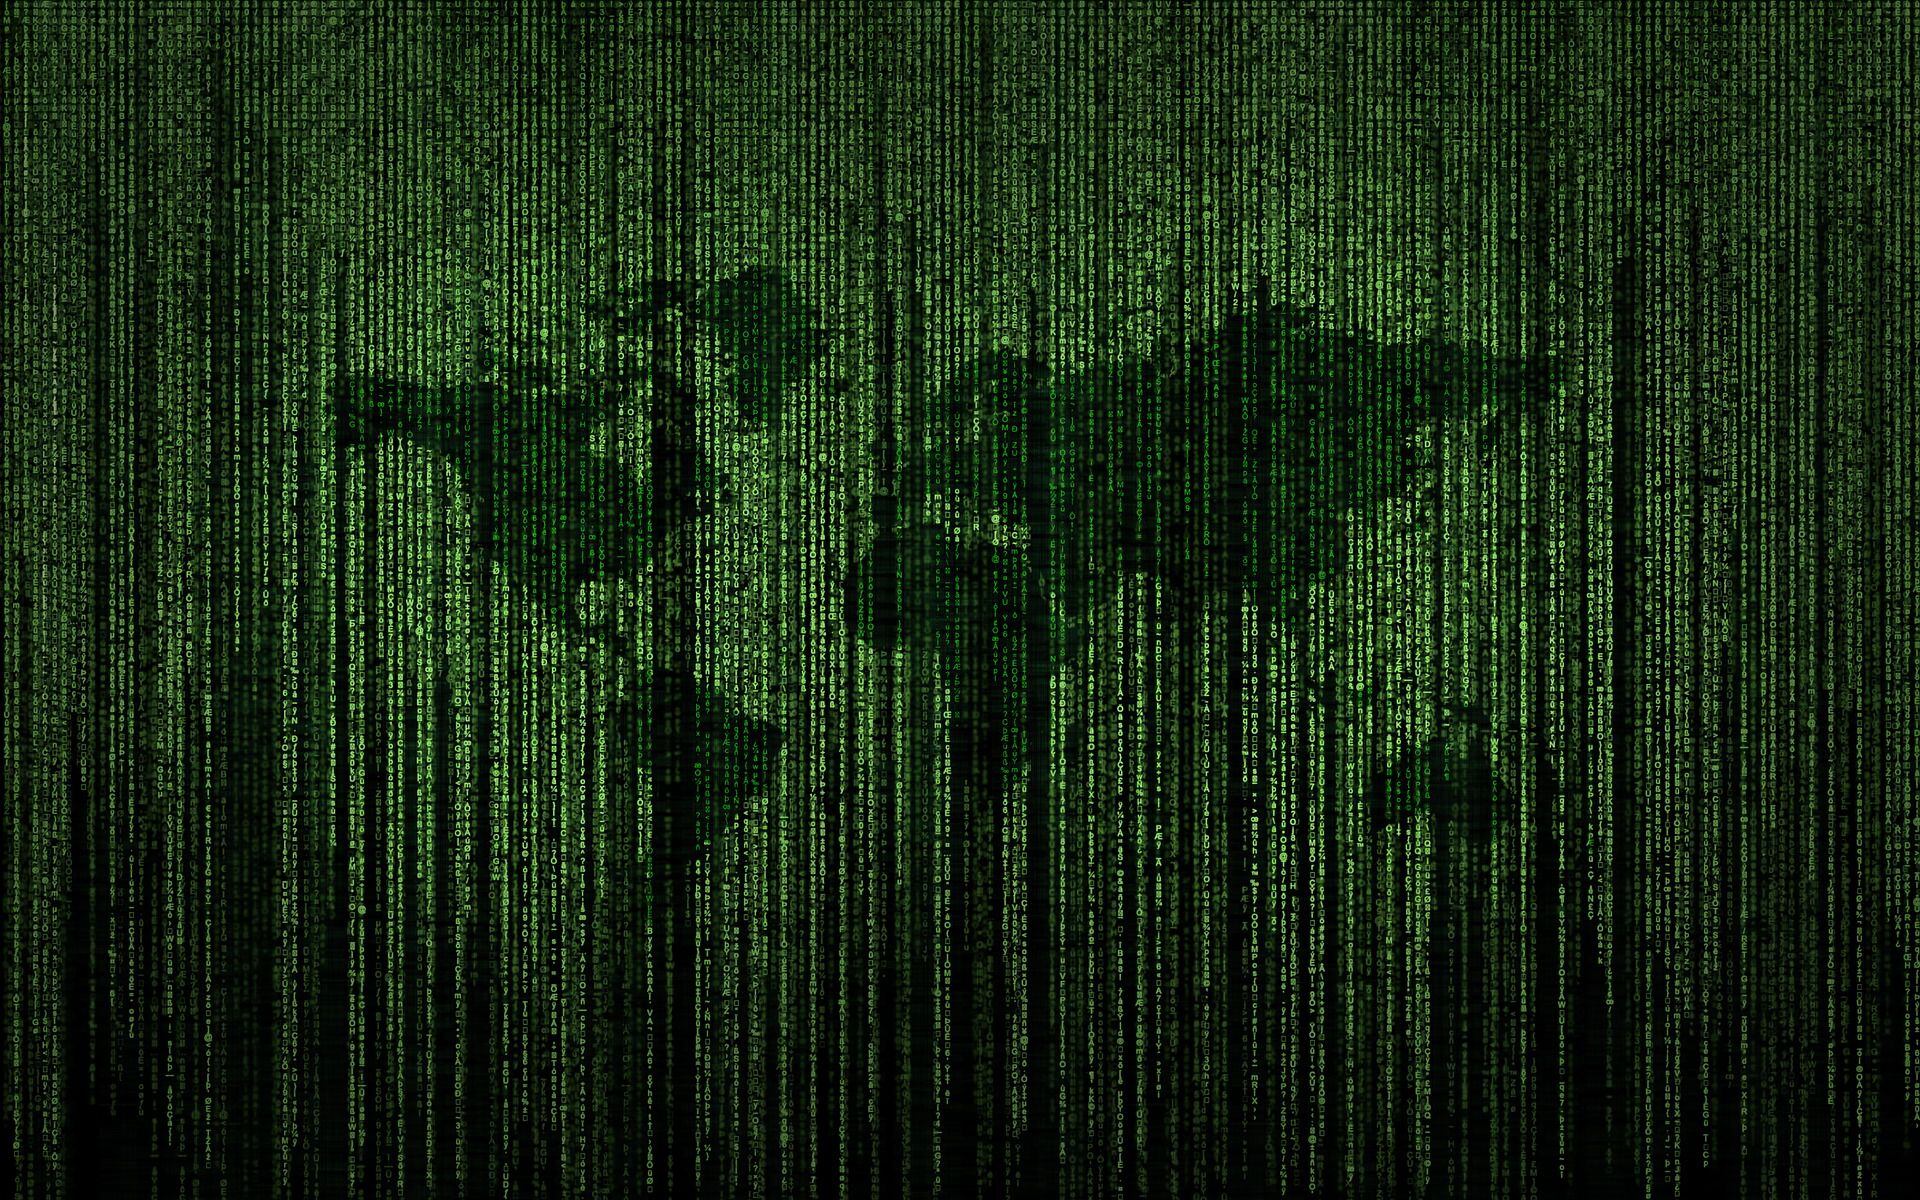 86% of executives fear a global cyberattack in the next 2 years